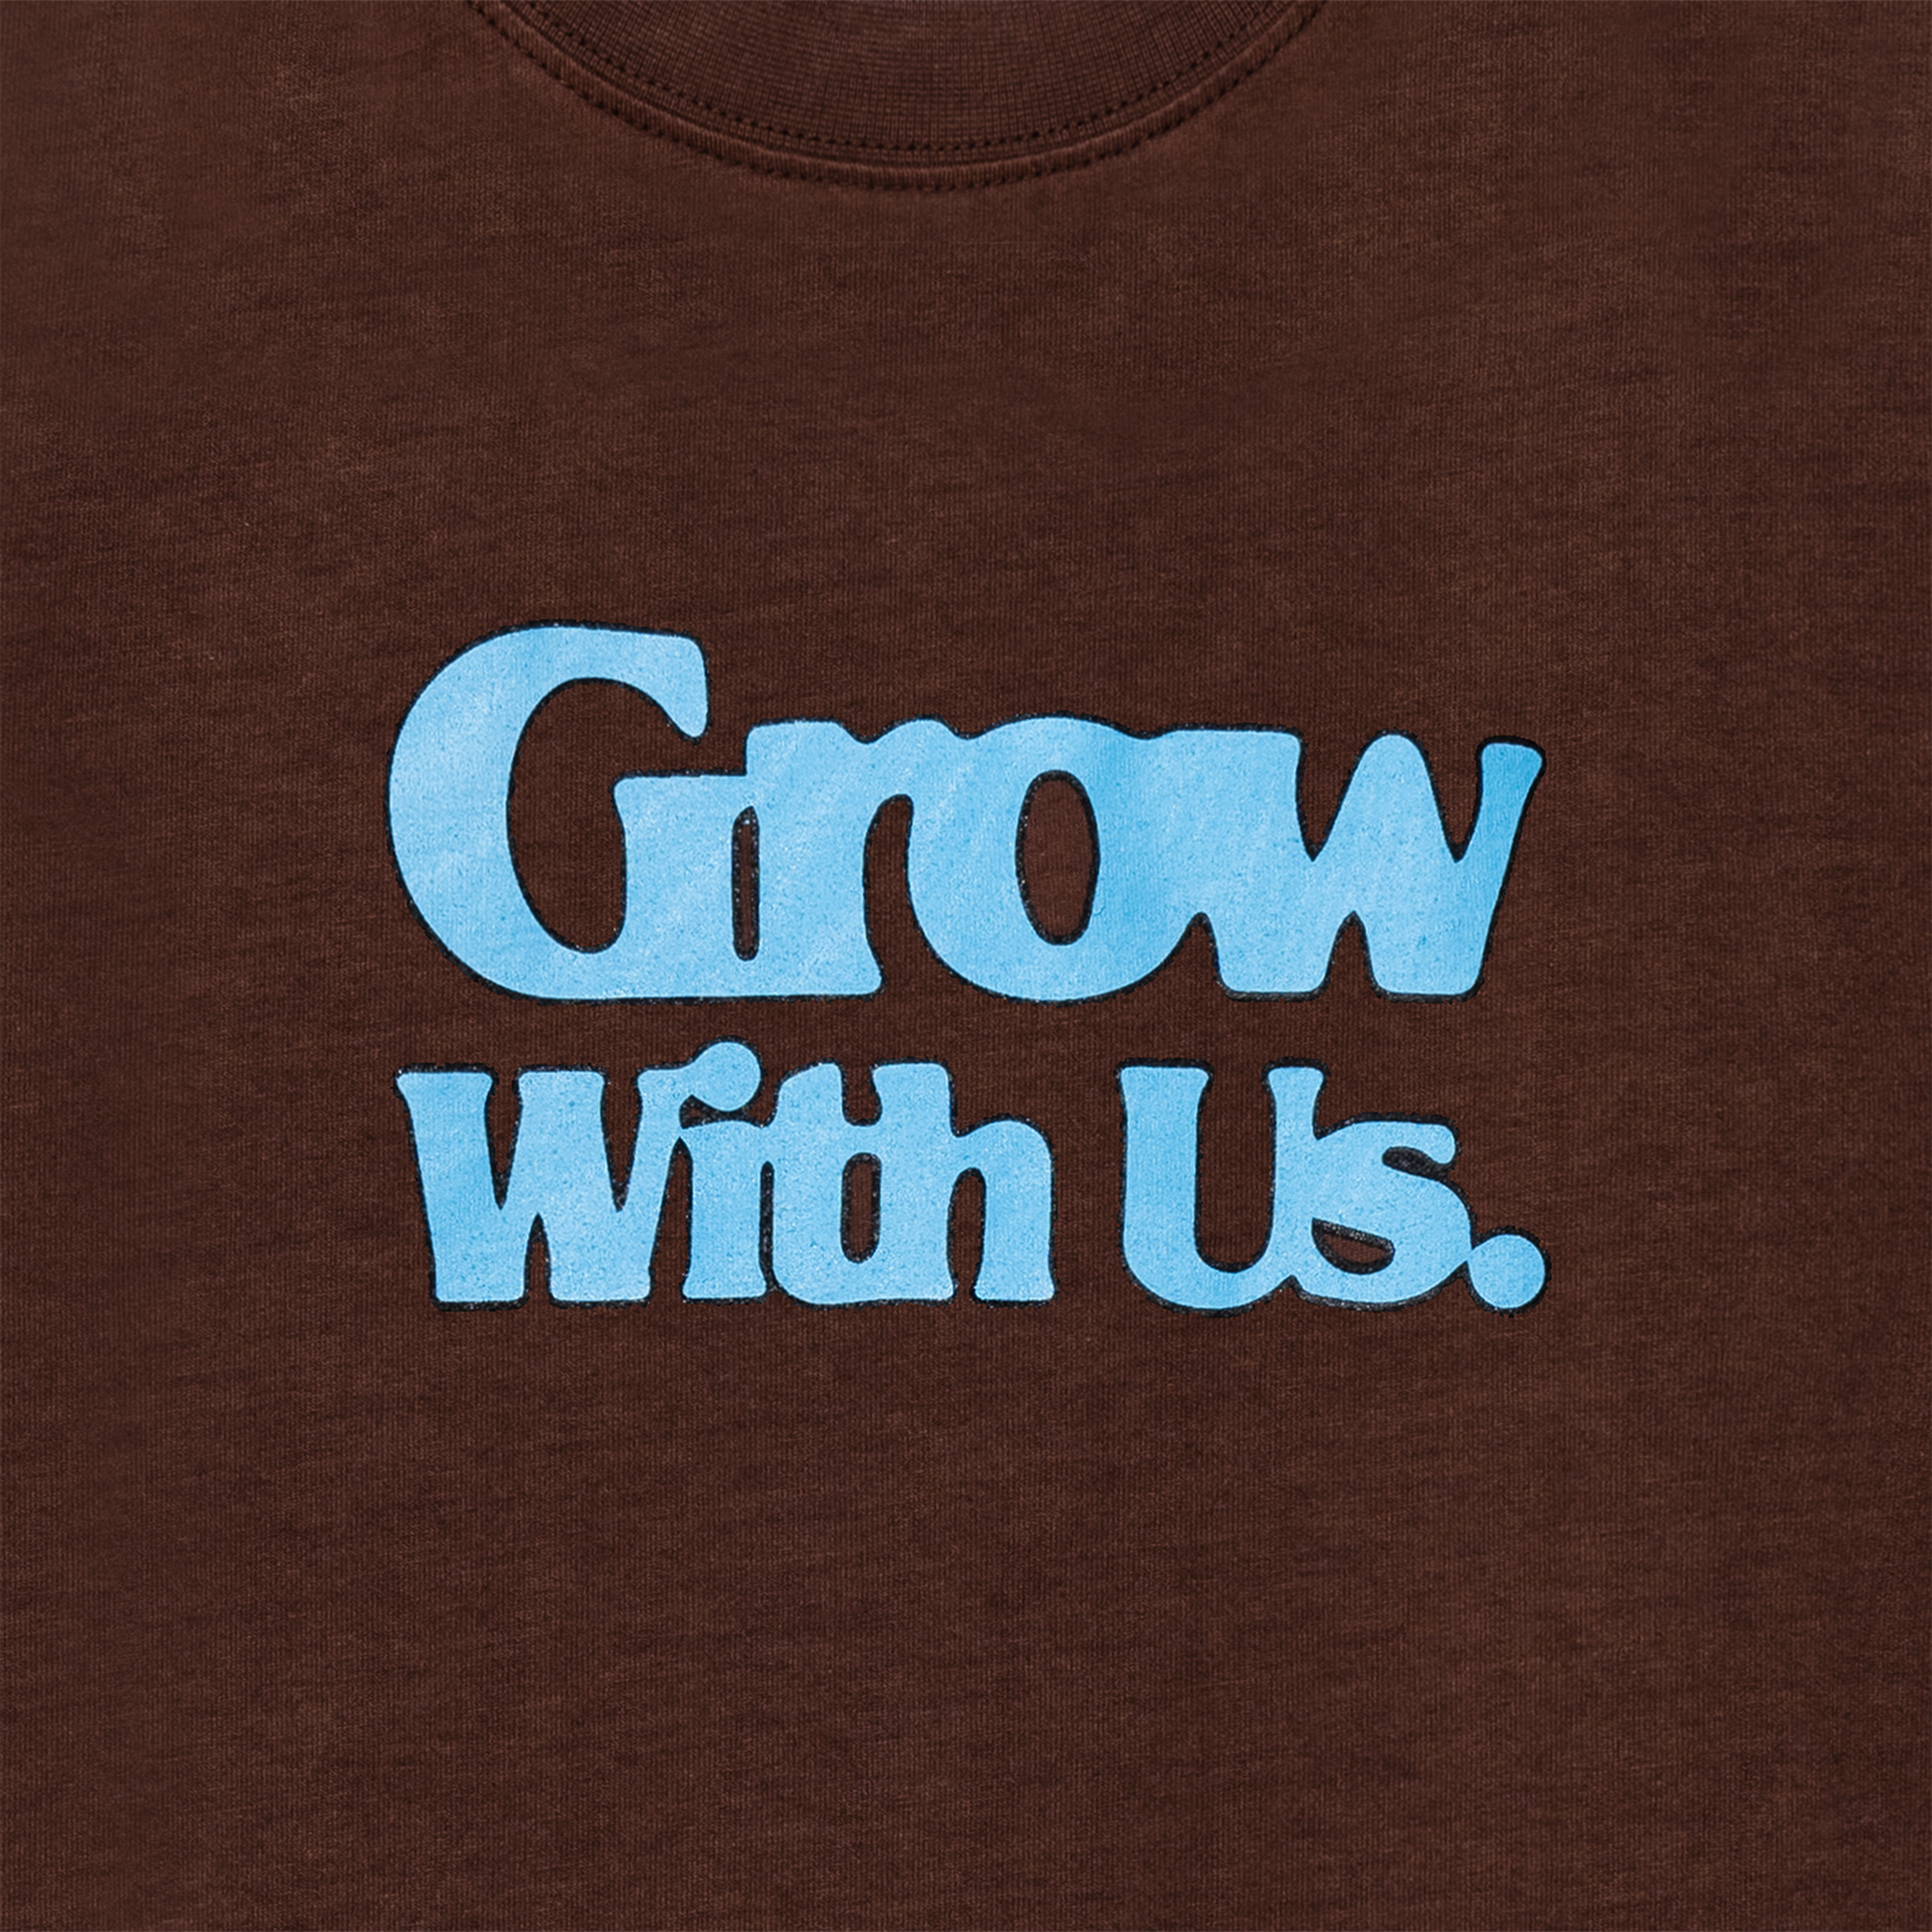 Alternate View 2 of GROW WITH US T-SHIRT